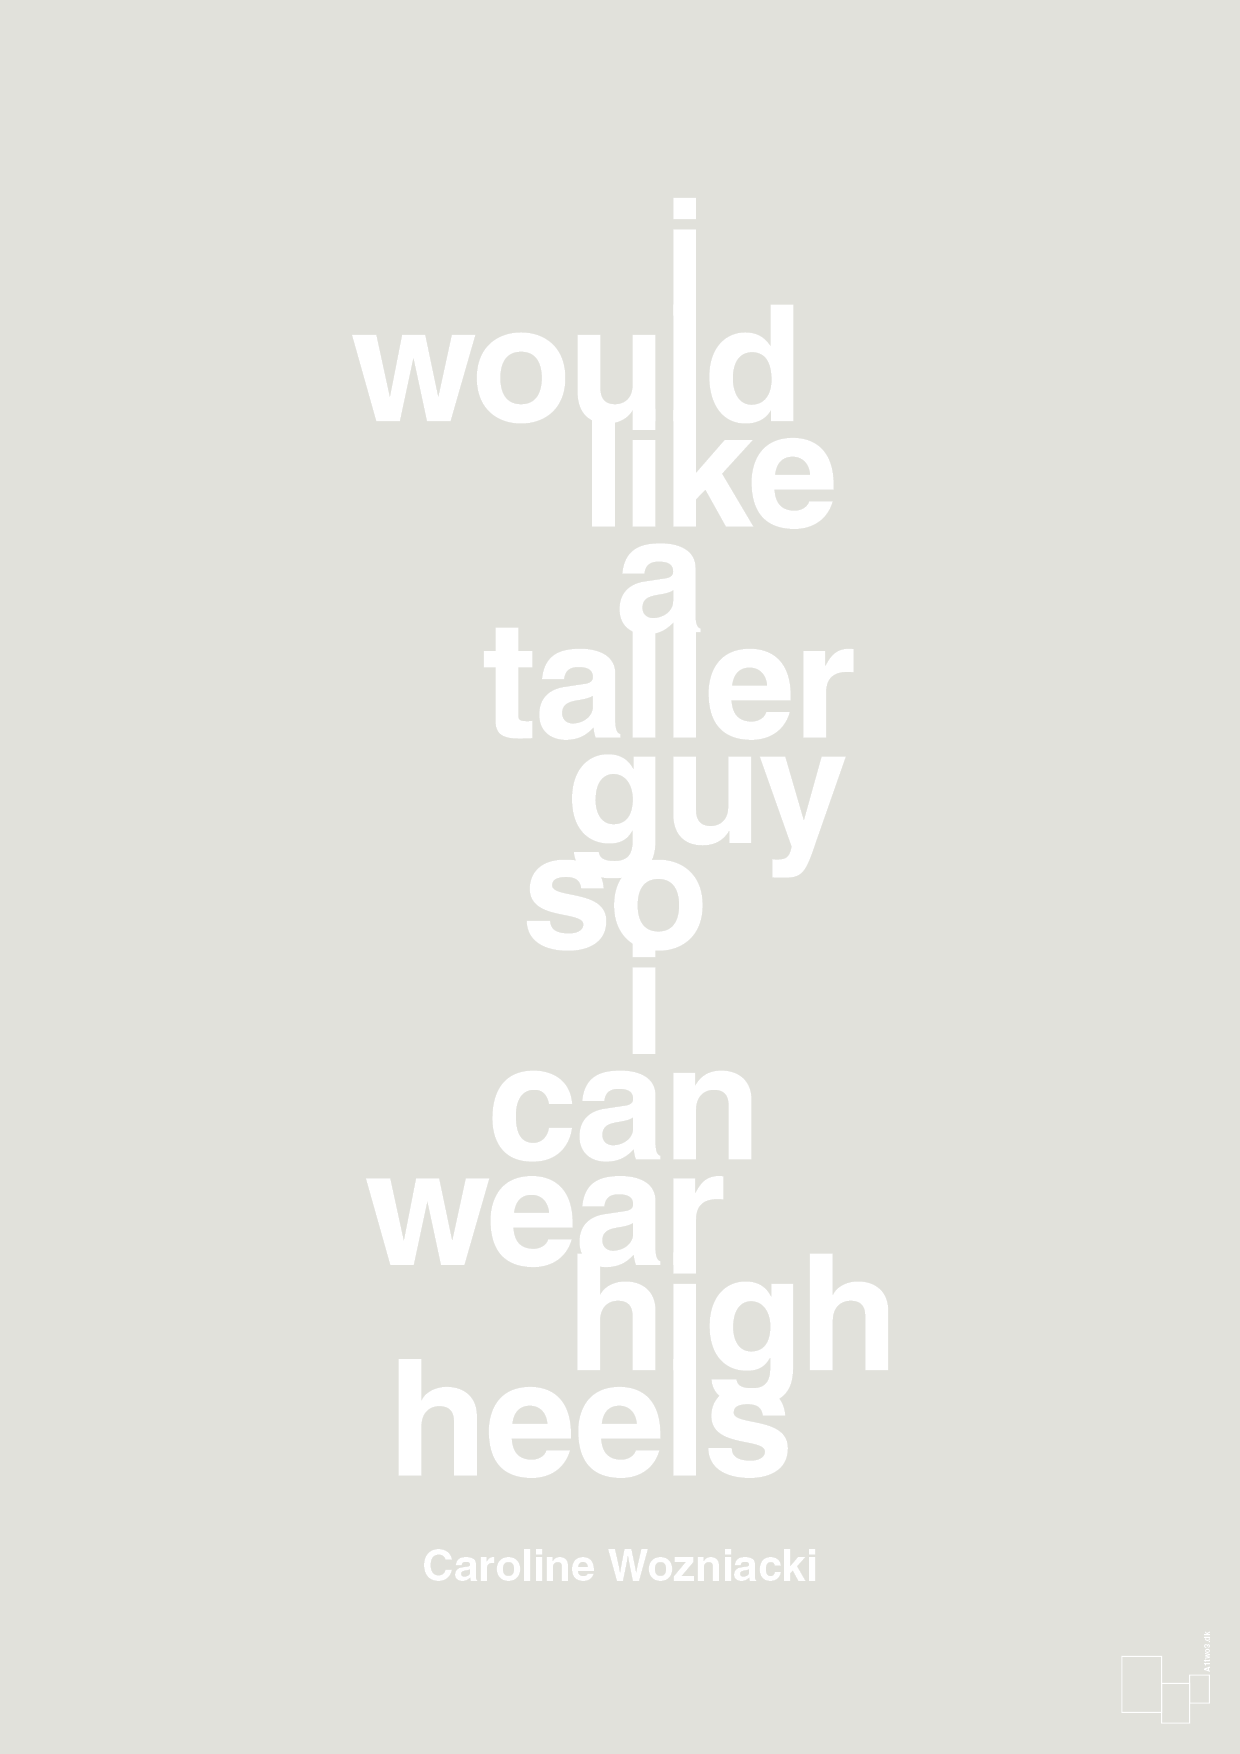 i would like a taller guy so i can wear high heels - Plakat med Citater i Painters White